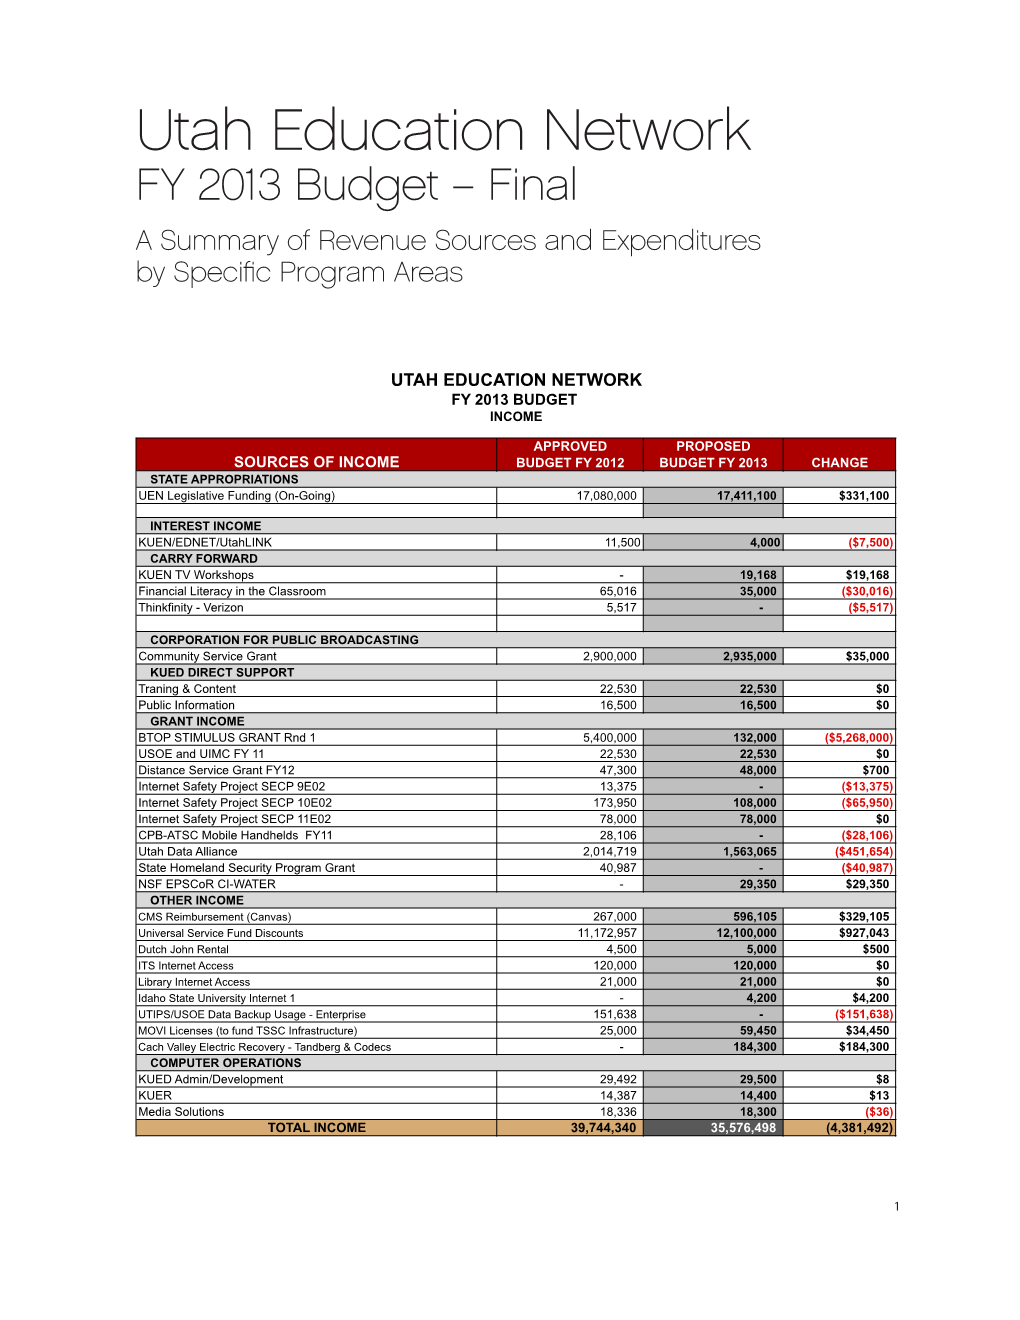 Utah Education Network FY 2013 Budget – Final a Summary of Revenue Sources and Expenditures by Specific Program Areas